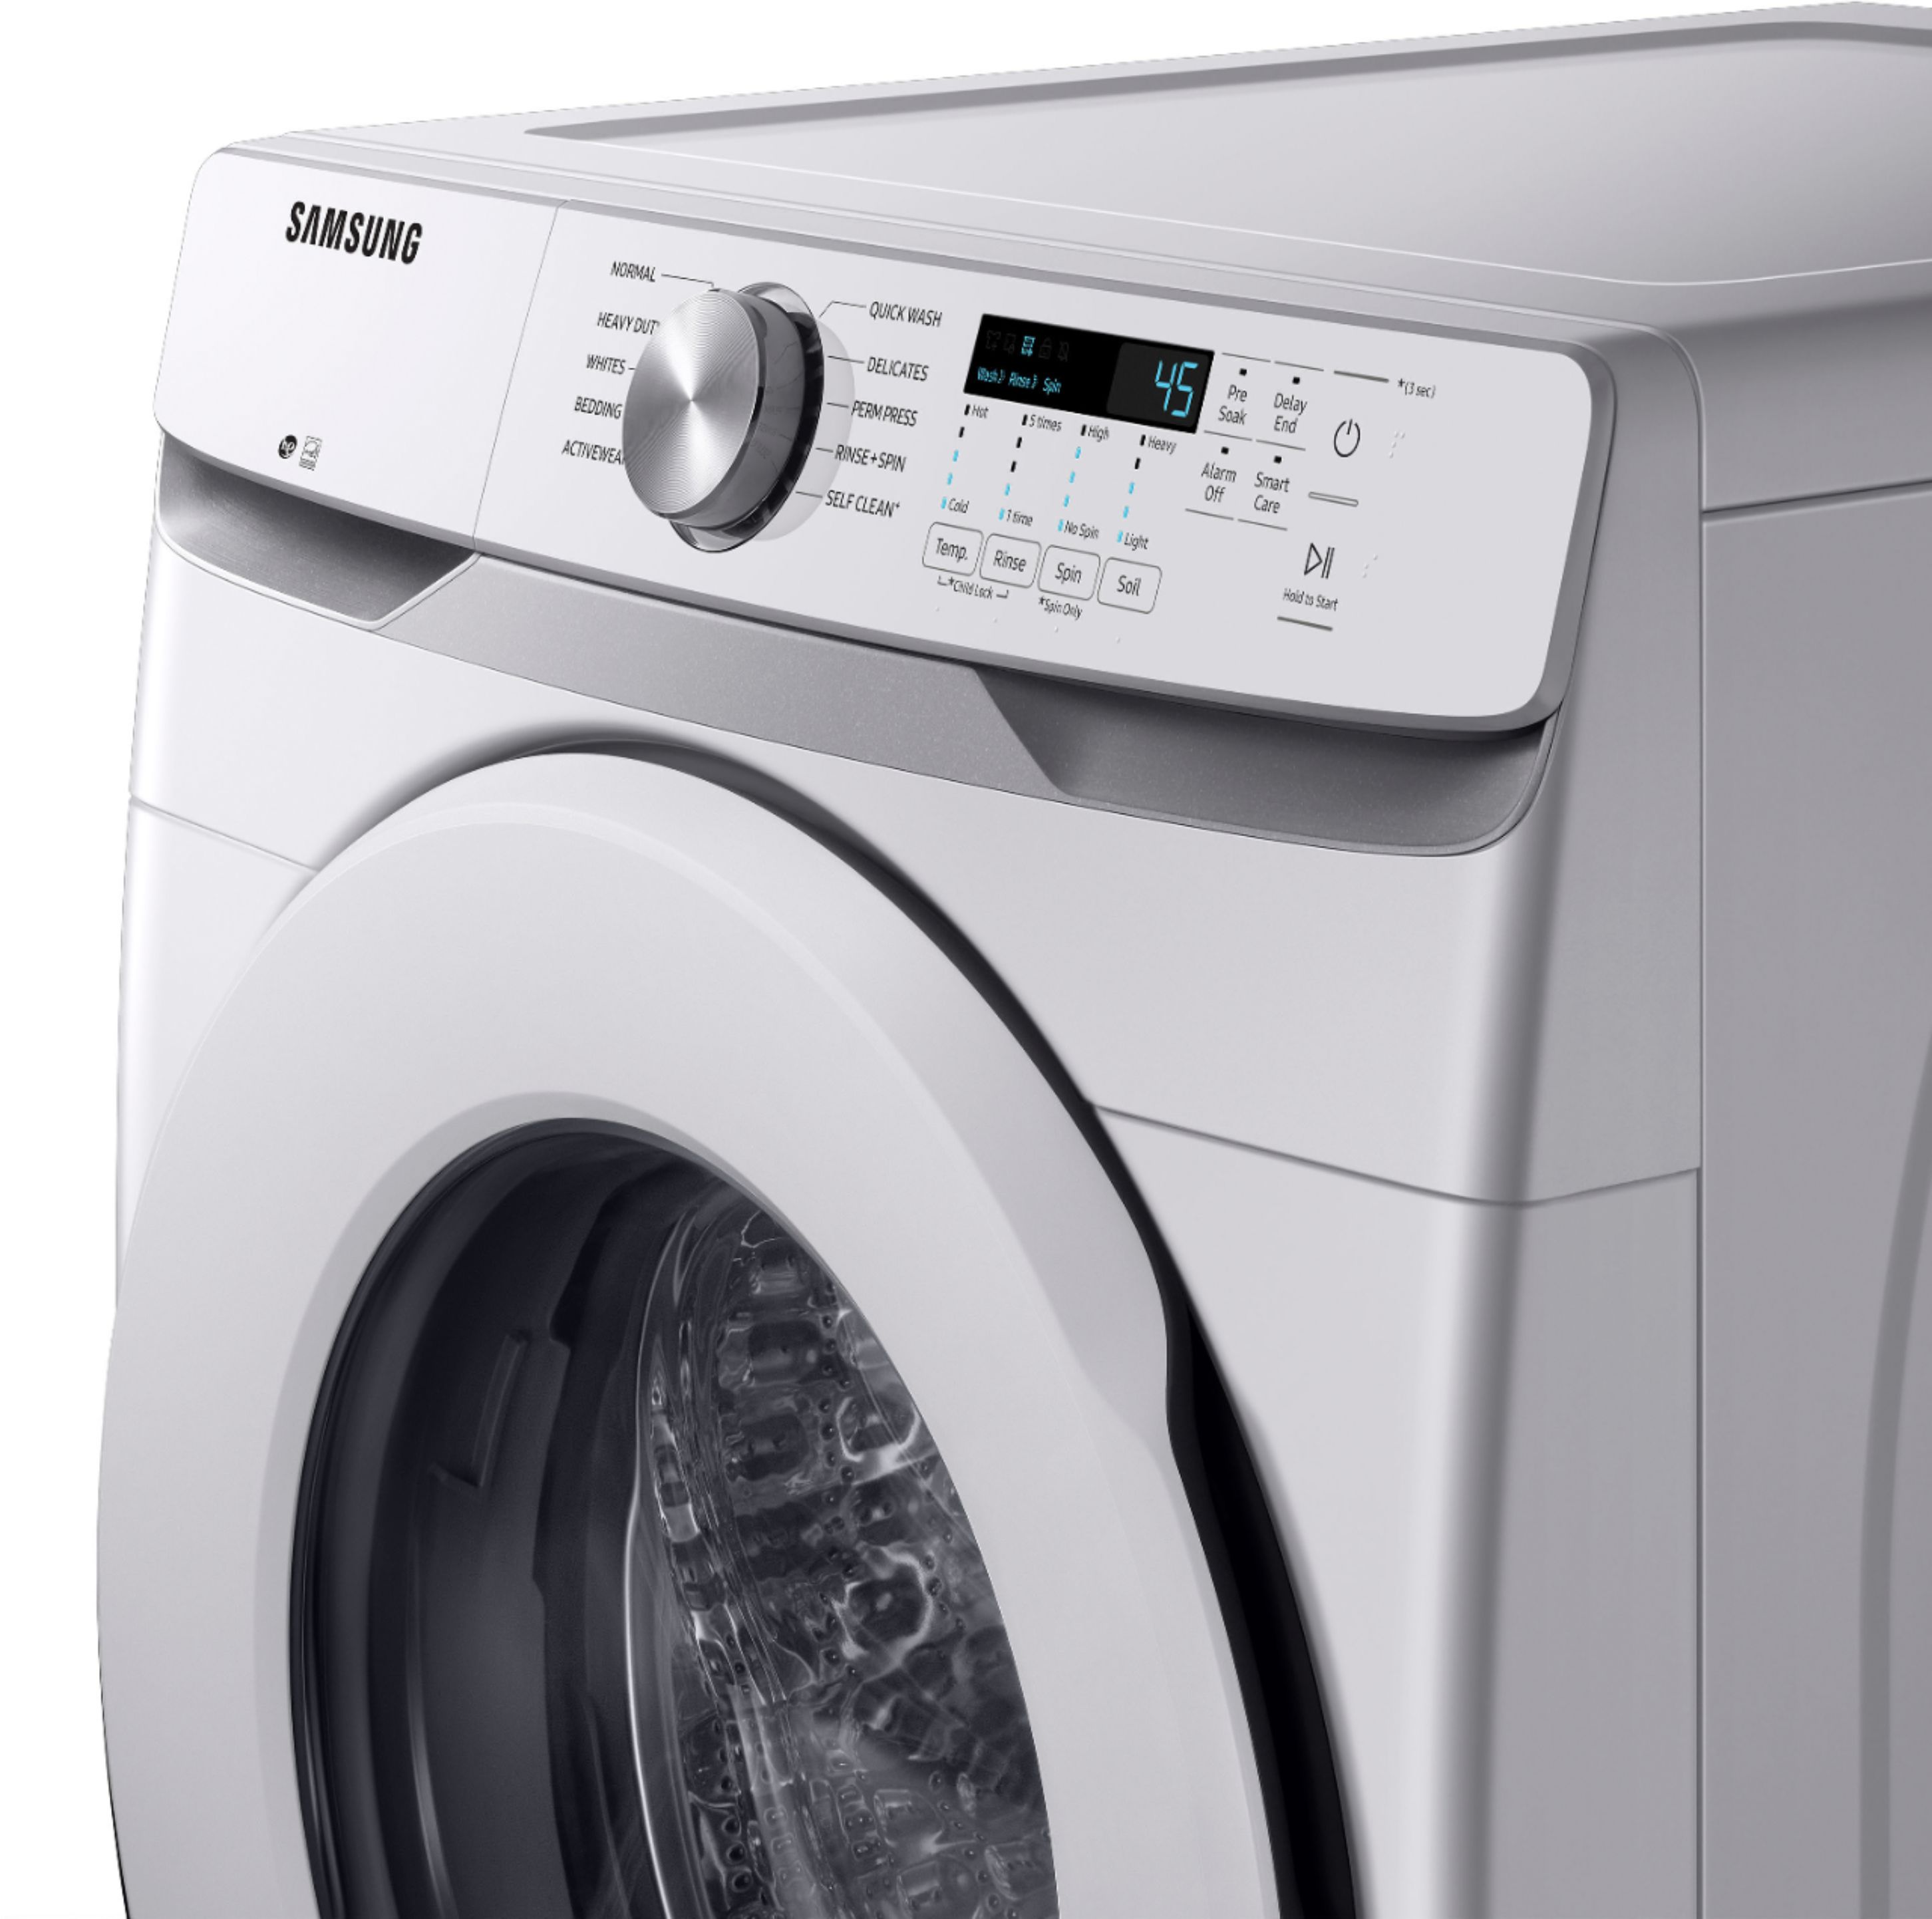 Samsung 27 in. 5.1 cu. ft. Smart Stackable Front Load Washer with Vibration  Reduction Technology - White